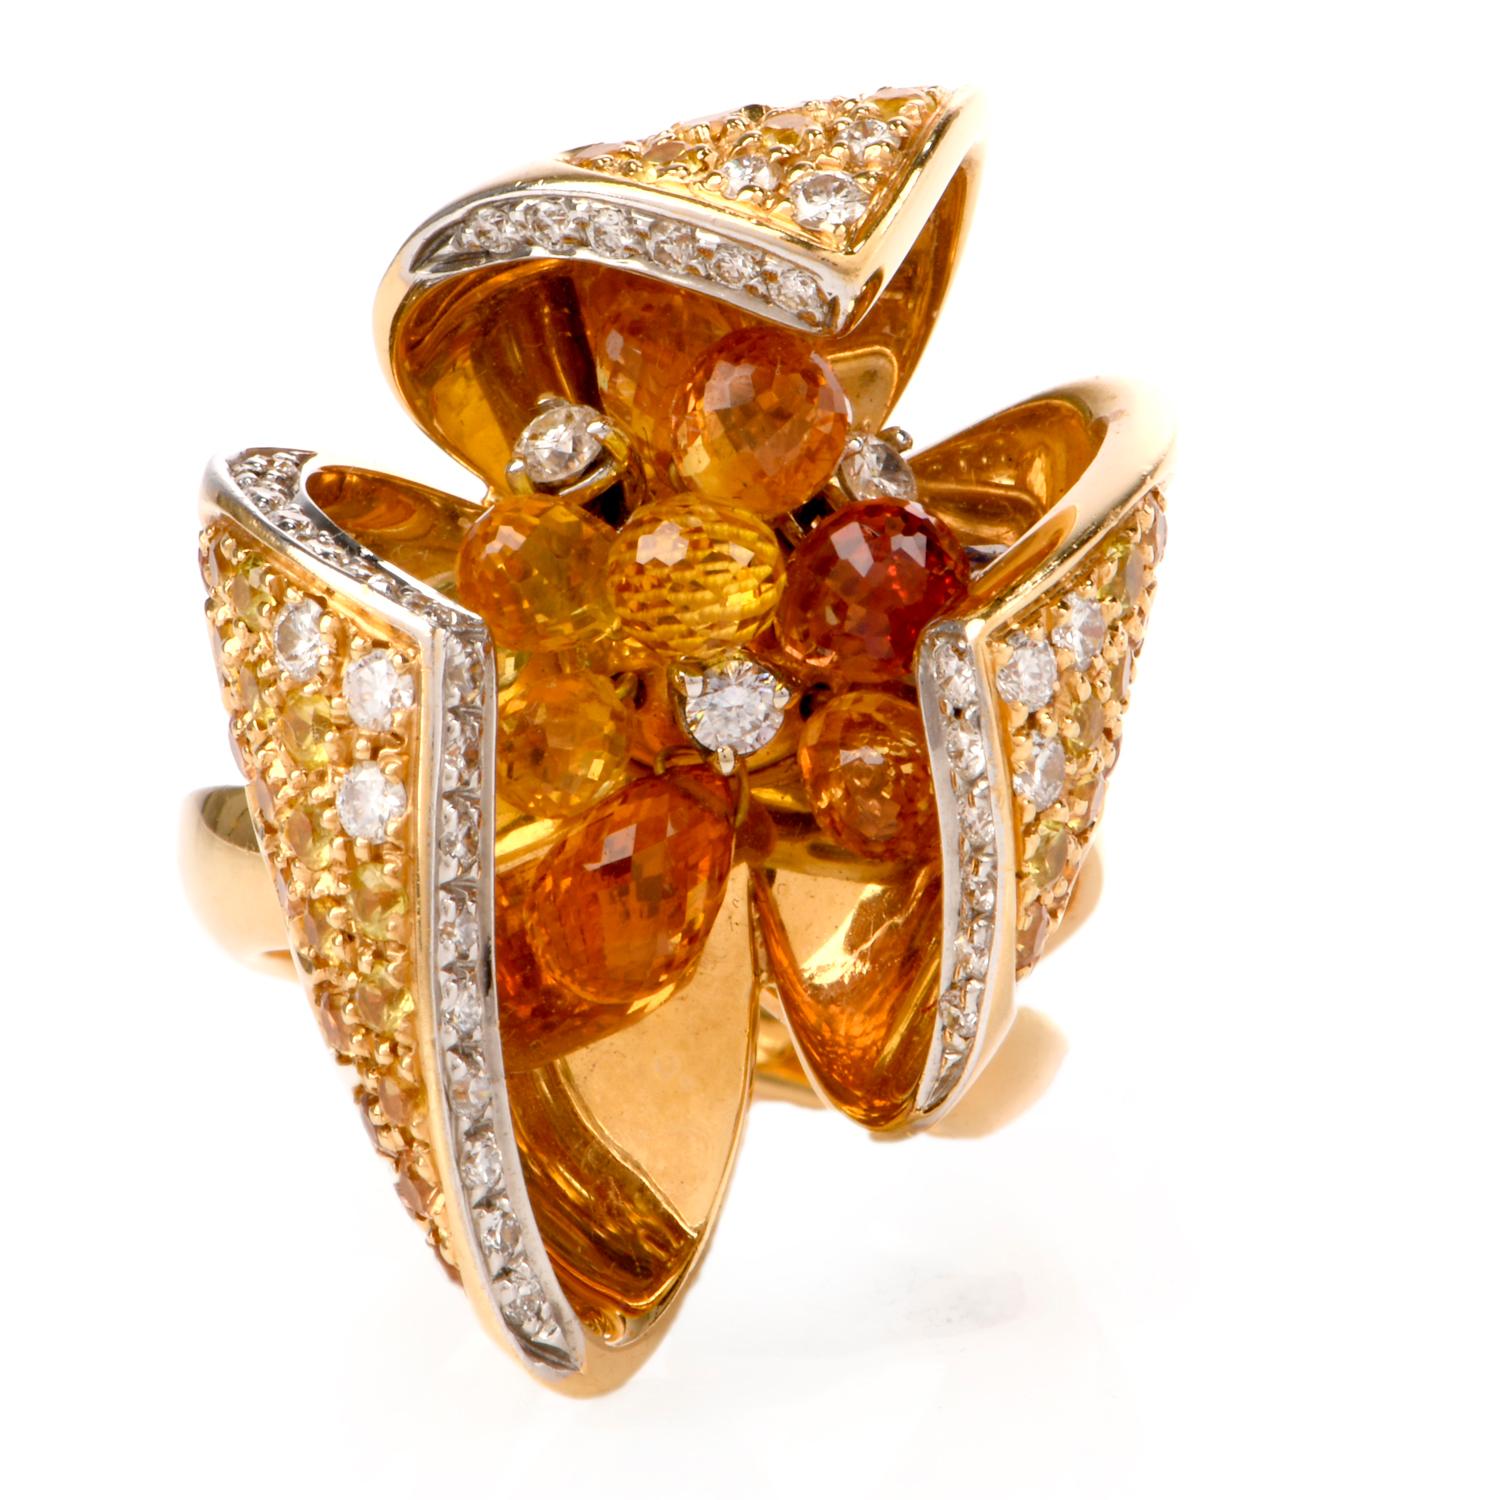 This limited-edition designer diamond and yellow sapphires cocktail ring is crafted in 18-karat yellow gold, weighing 22.5 grams and measuring 30mm x 15mm high. Ring simulate three petal flower-heads, the inner edges of the ‘petals’ are pave-set